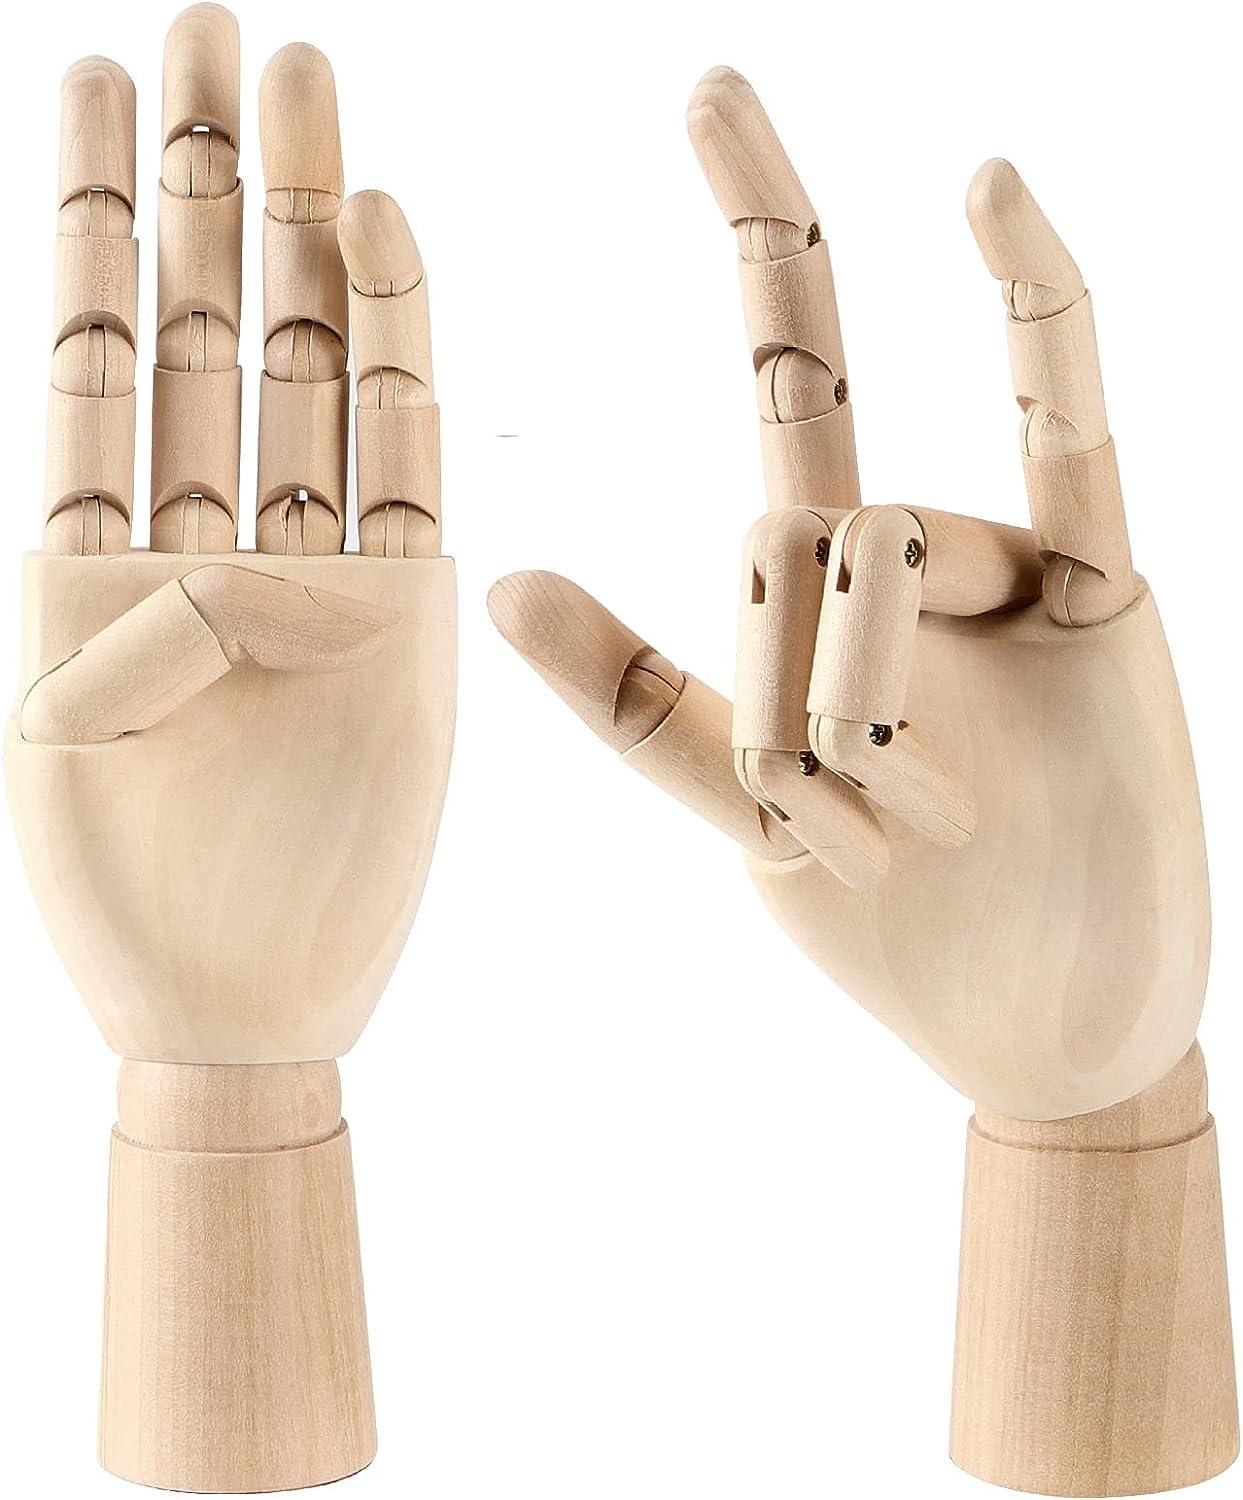 Buy Art Mannequin, Yookat Wood Art Mannequin Hand Model - Perfect for  Drawing, Sketch, etc.(Female Hand) 10 inch Wooden Sectioned Flexible  Fingers Manikin Hand Figure Random Left or Right Hand Online at